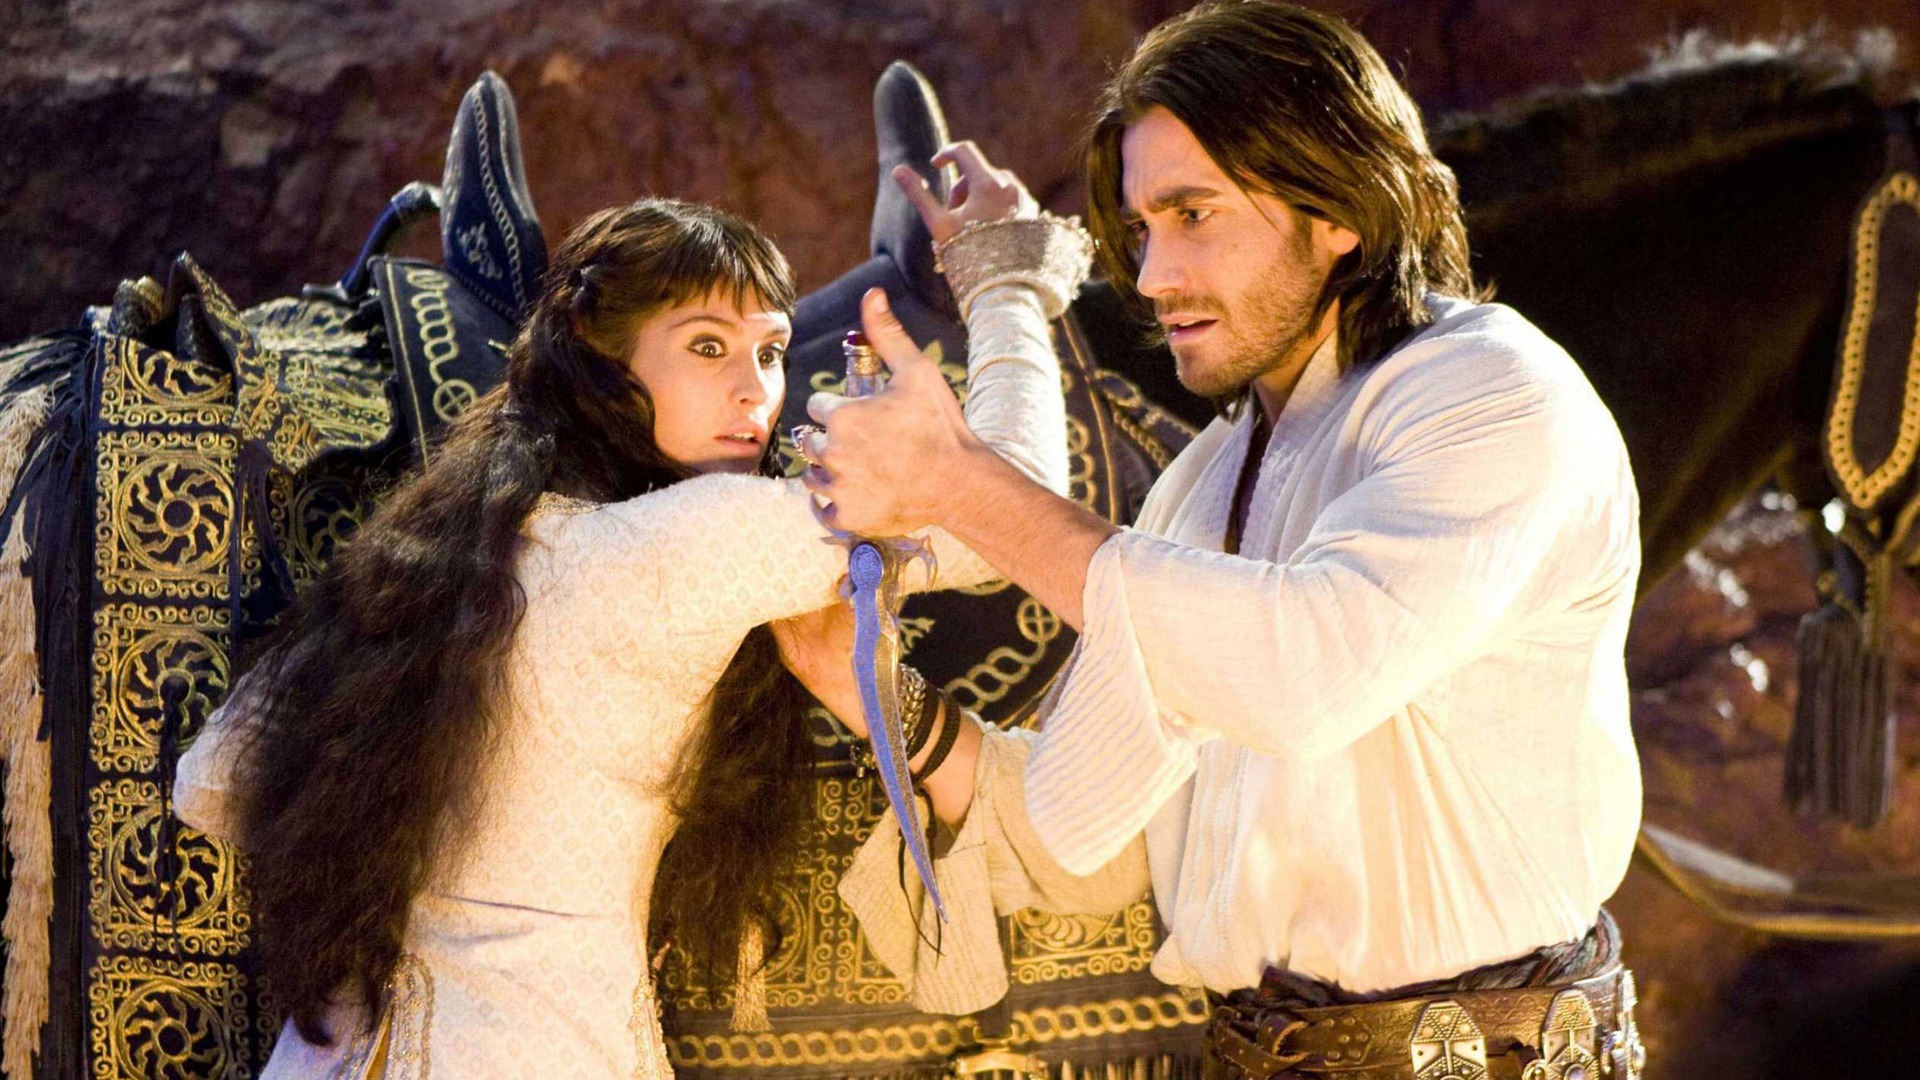 Prince of Persia The Sands of Time 波斯王子：时之刃18 - 1920x1080